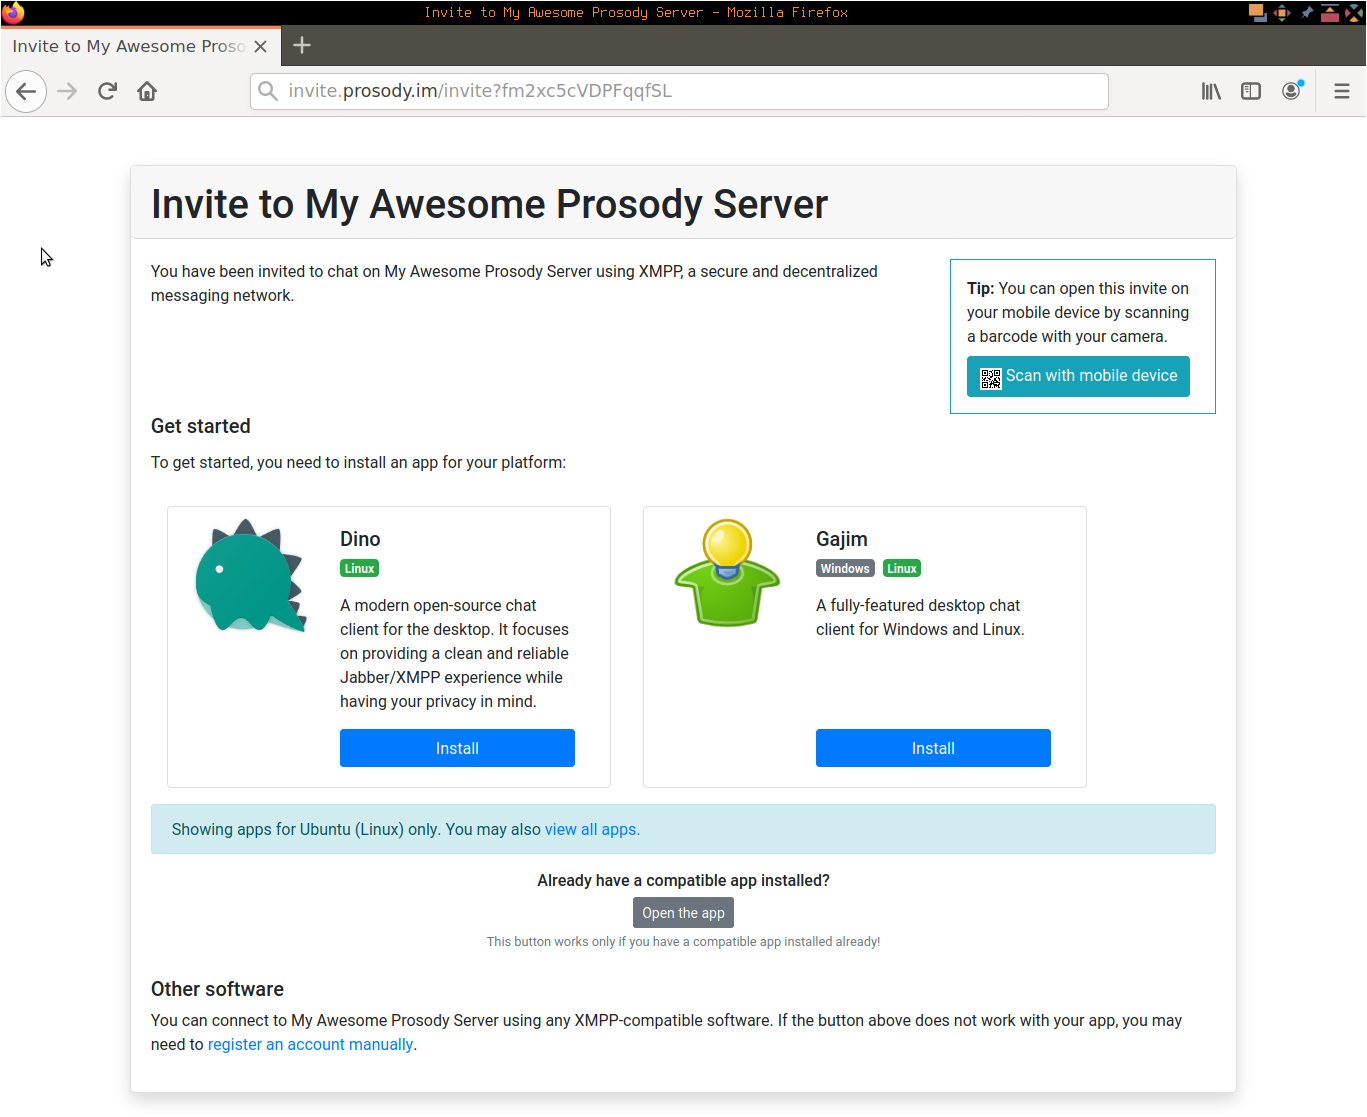 Screenshot of the Prosody invitation page